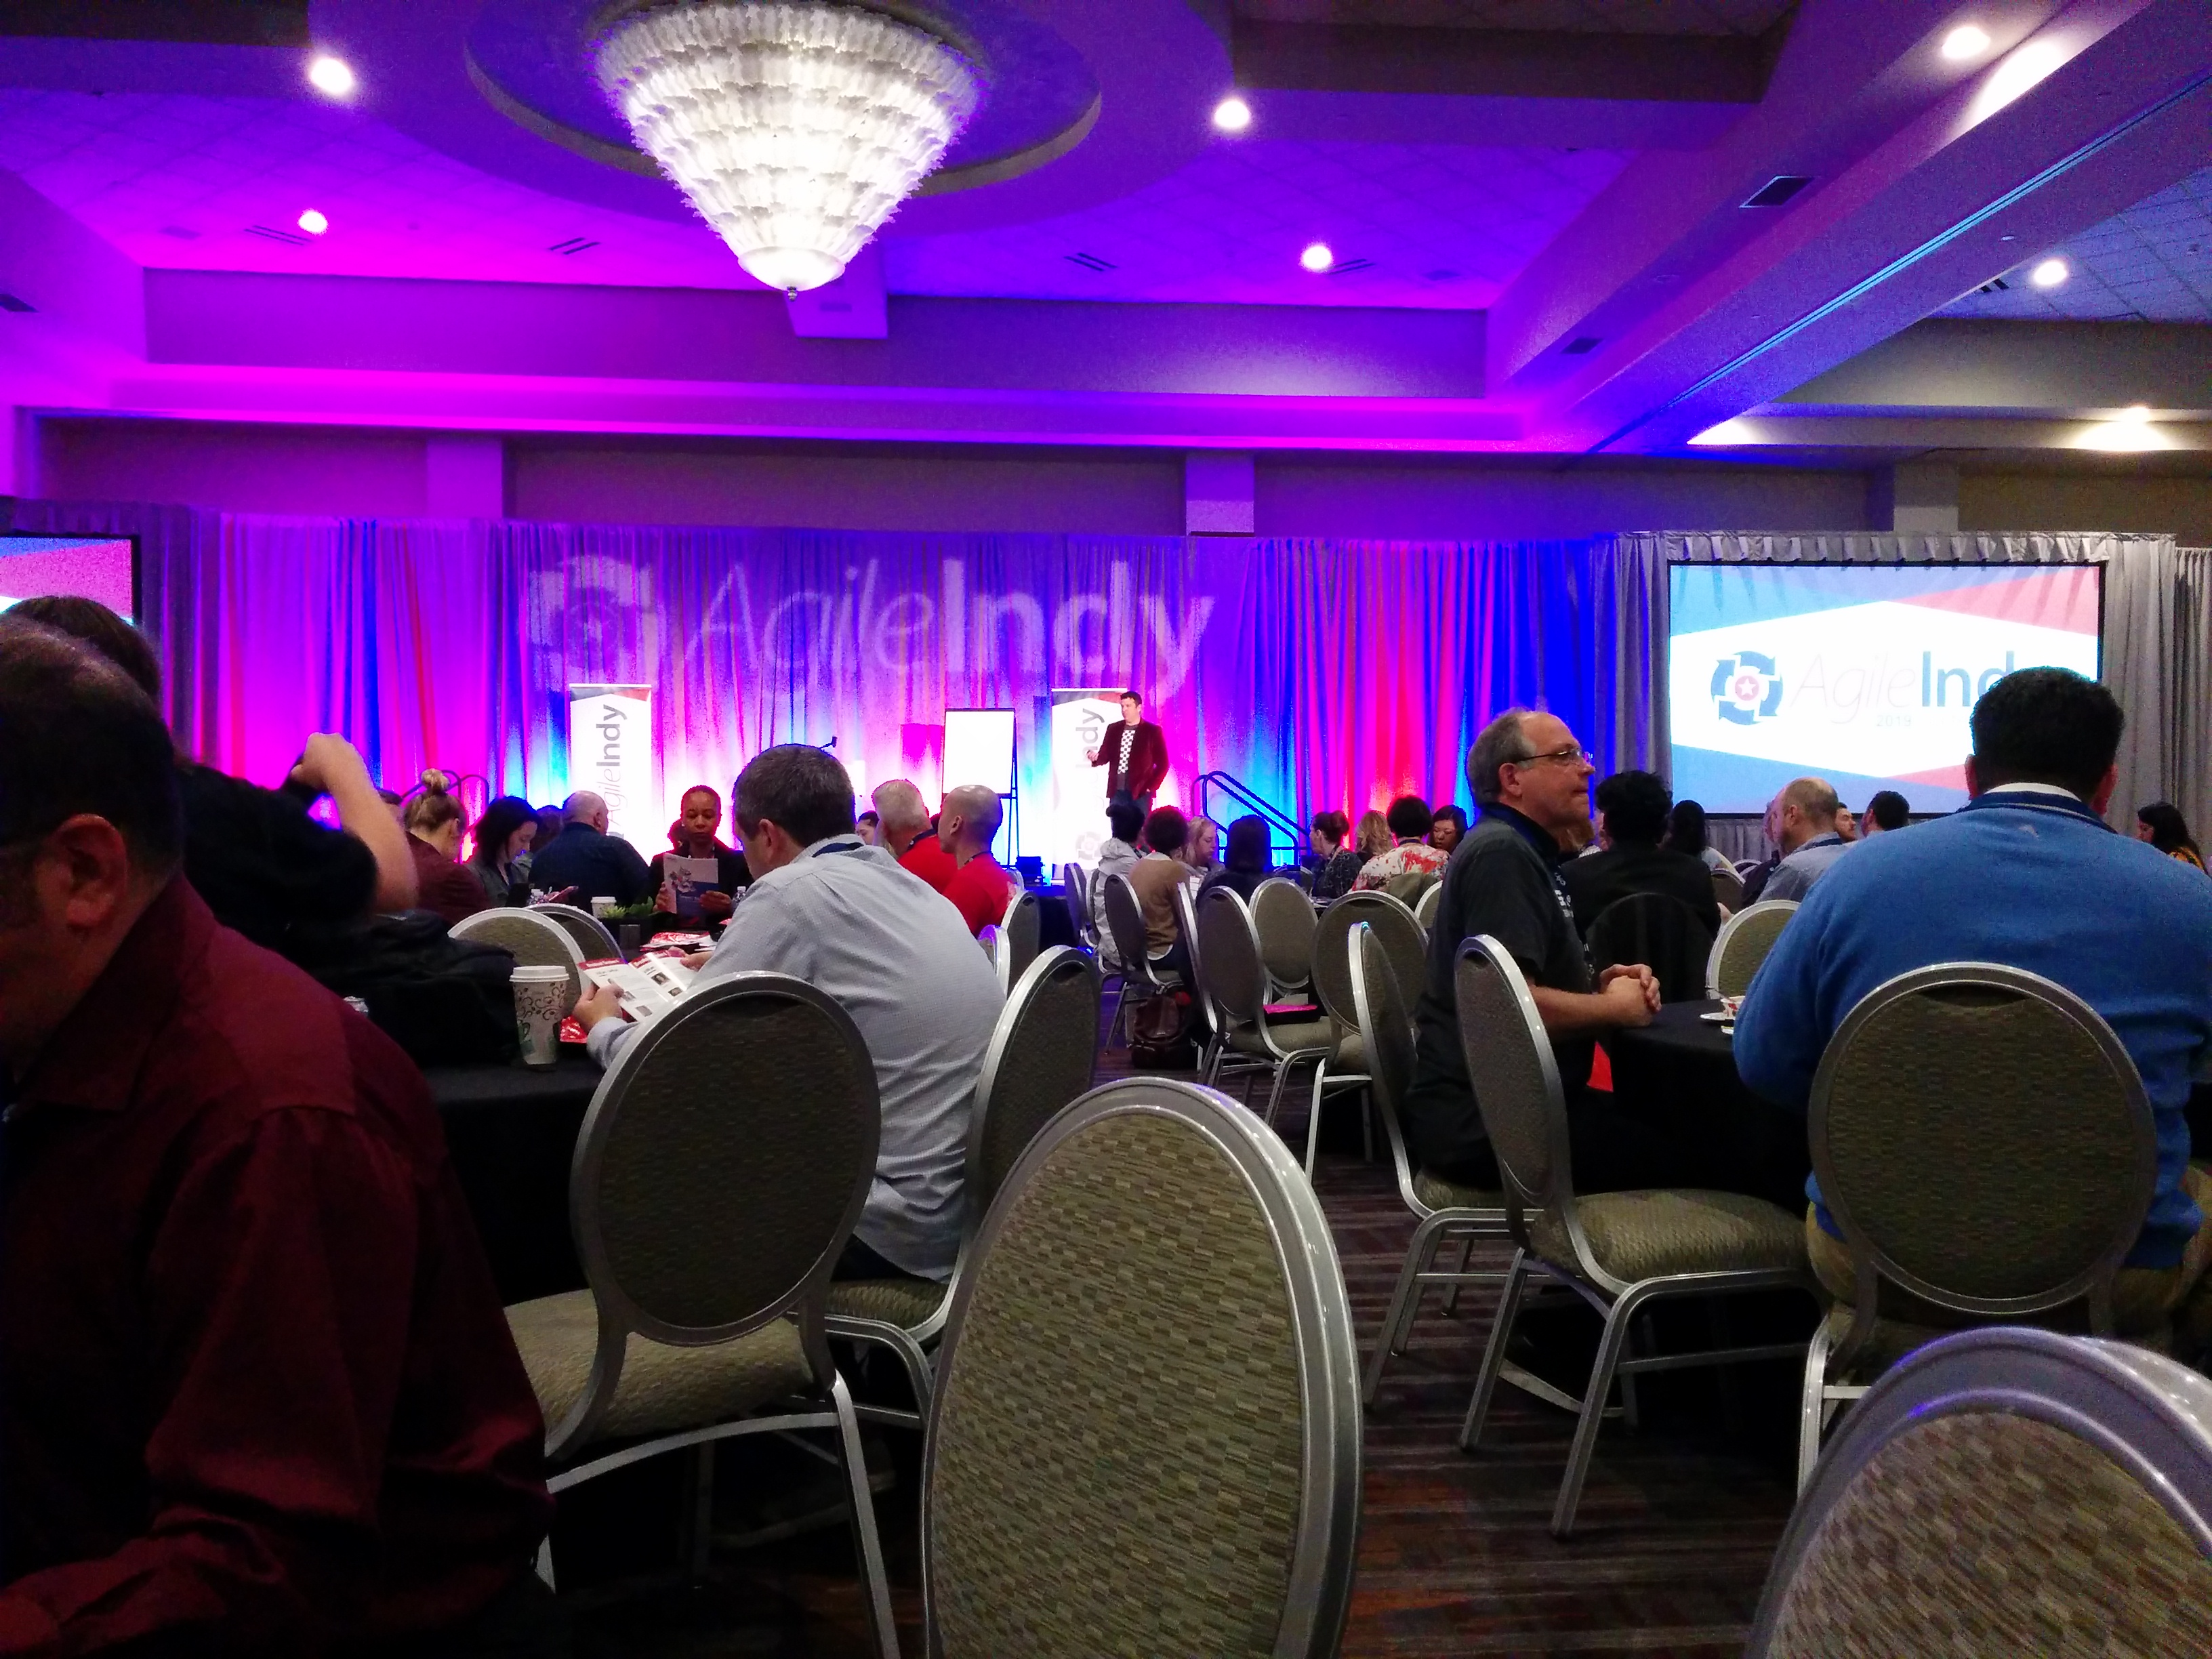 AgileIndy: Opening Remarks